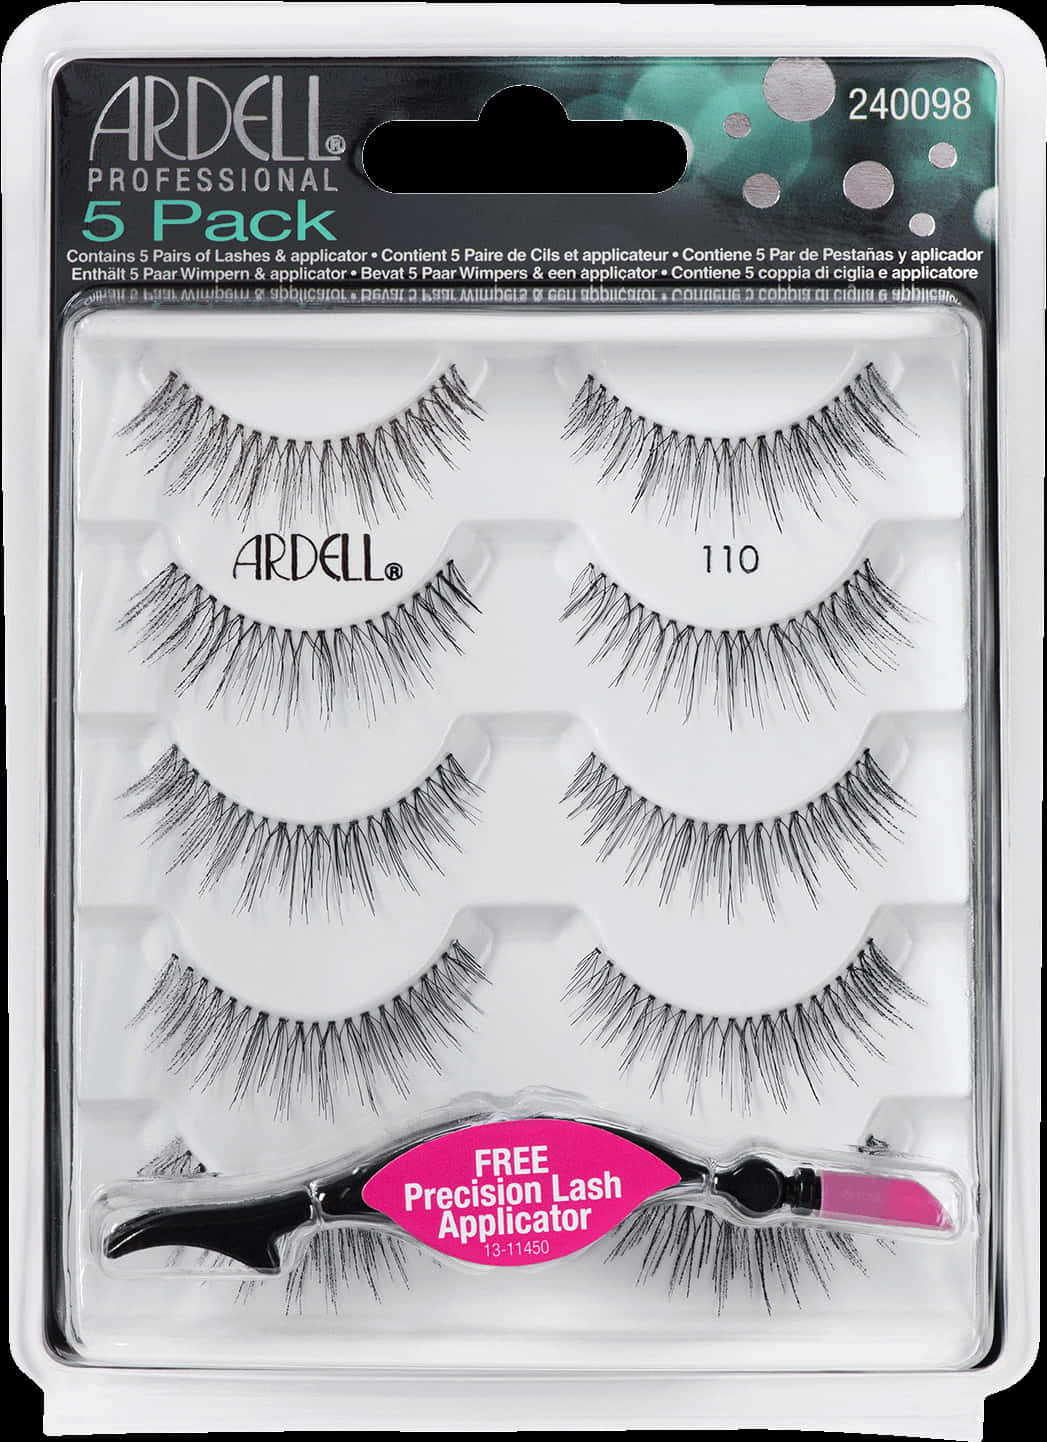 Ardell Professional Lash Packwith Applicator